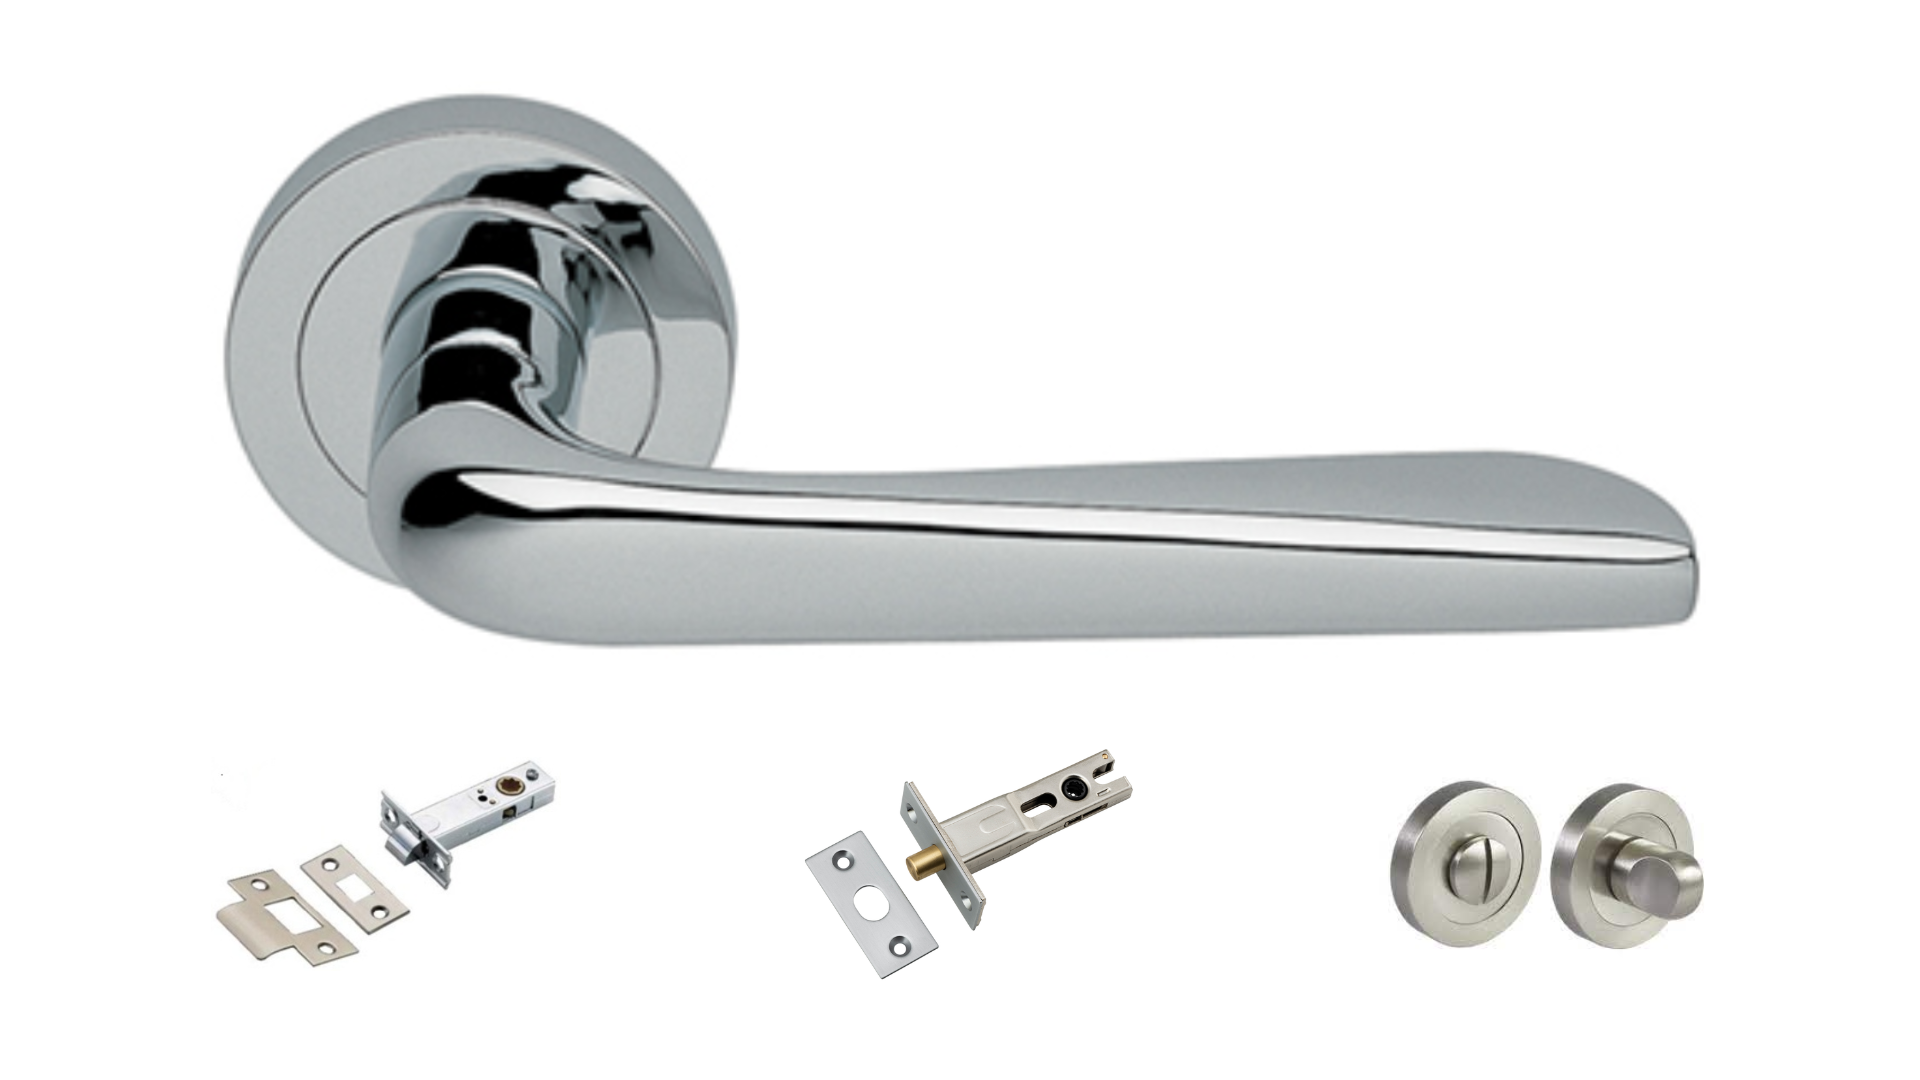 Product picture of the Petra Polished Chrome Door Handle with accessories tubular latch, privacy turn and release, and a privacy bolt on a white background.